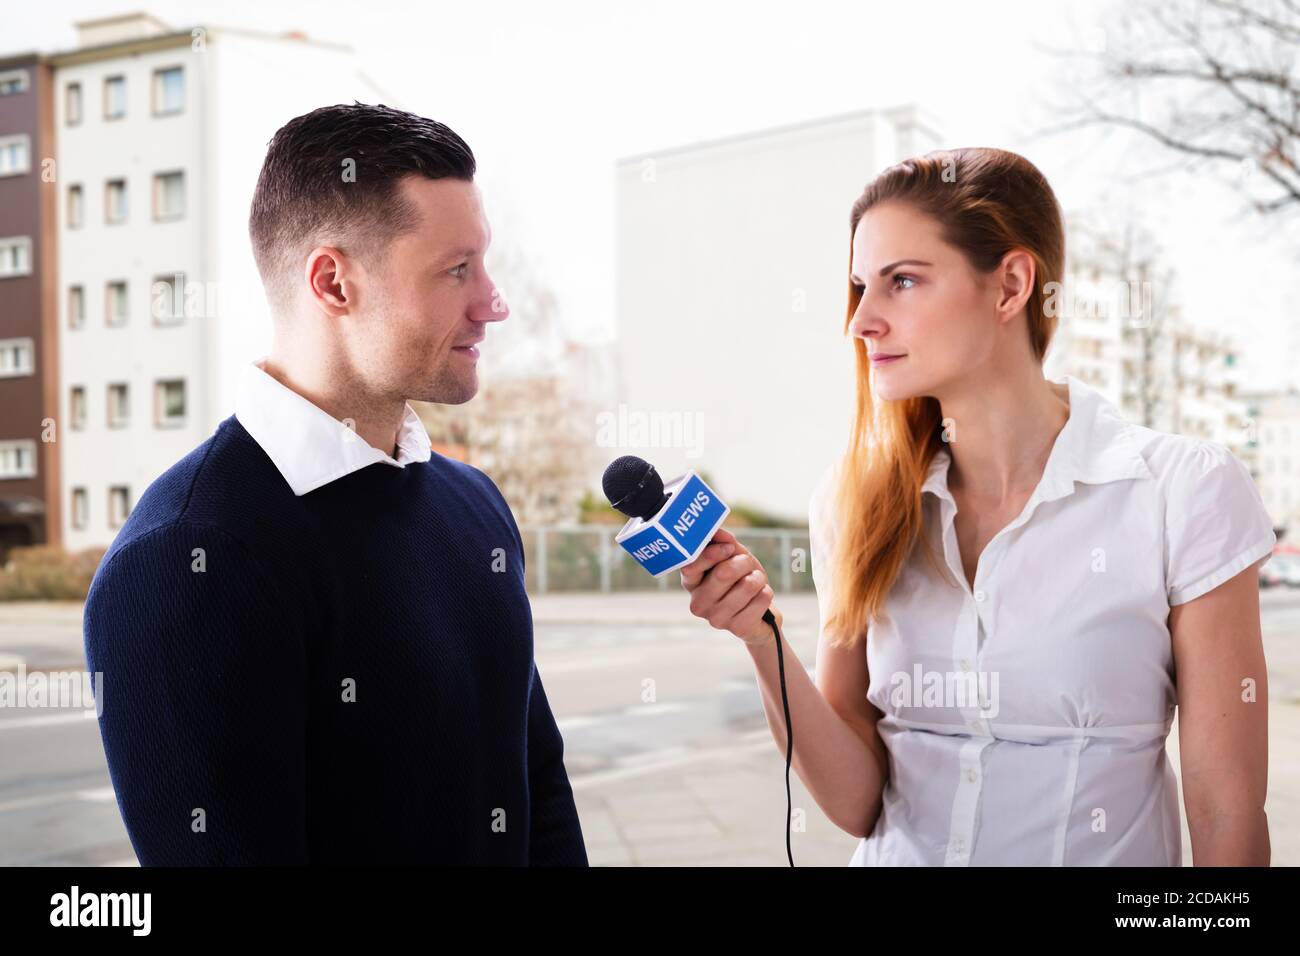 News Press Journalist Interview Using Microphone. Two Persons Stock Photo